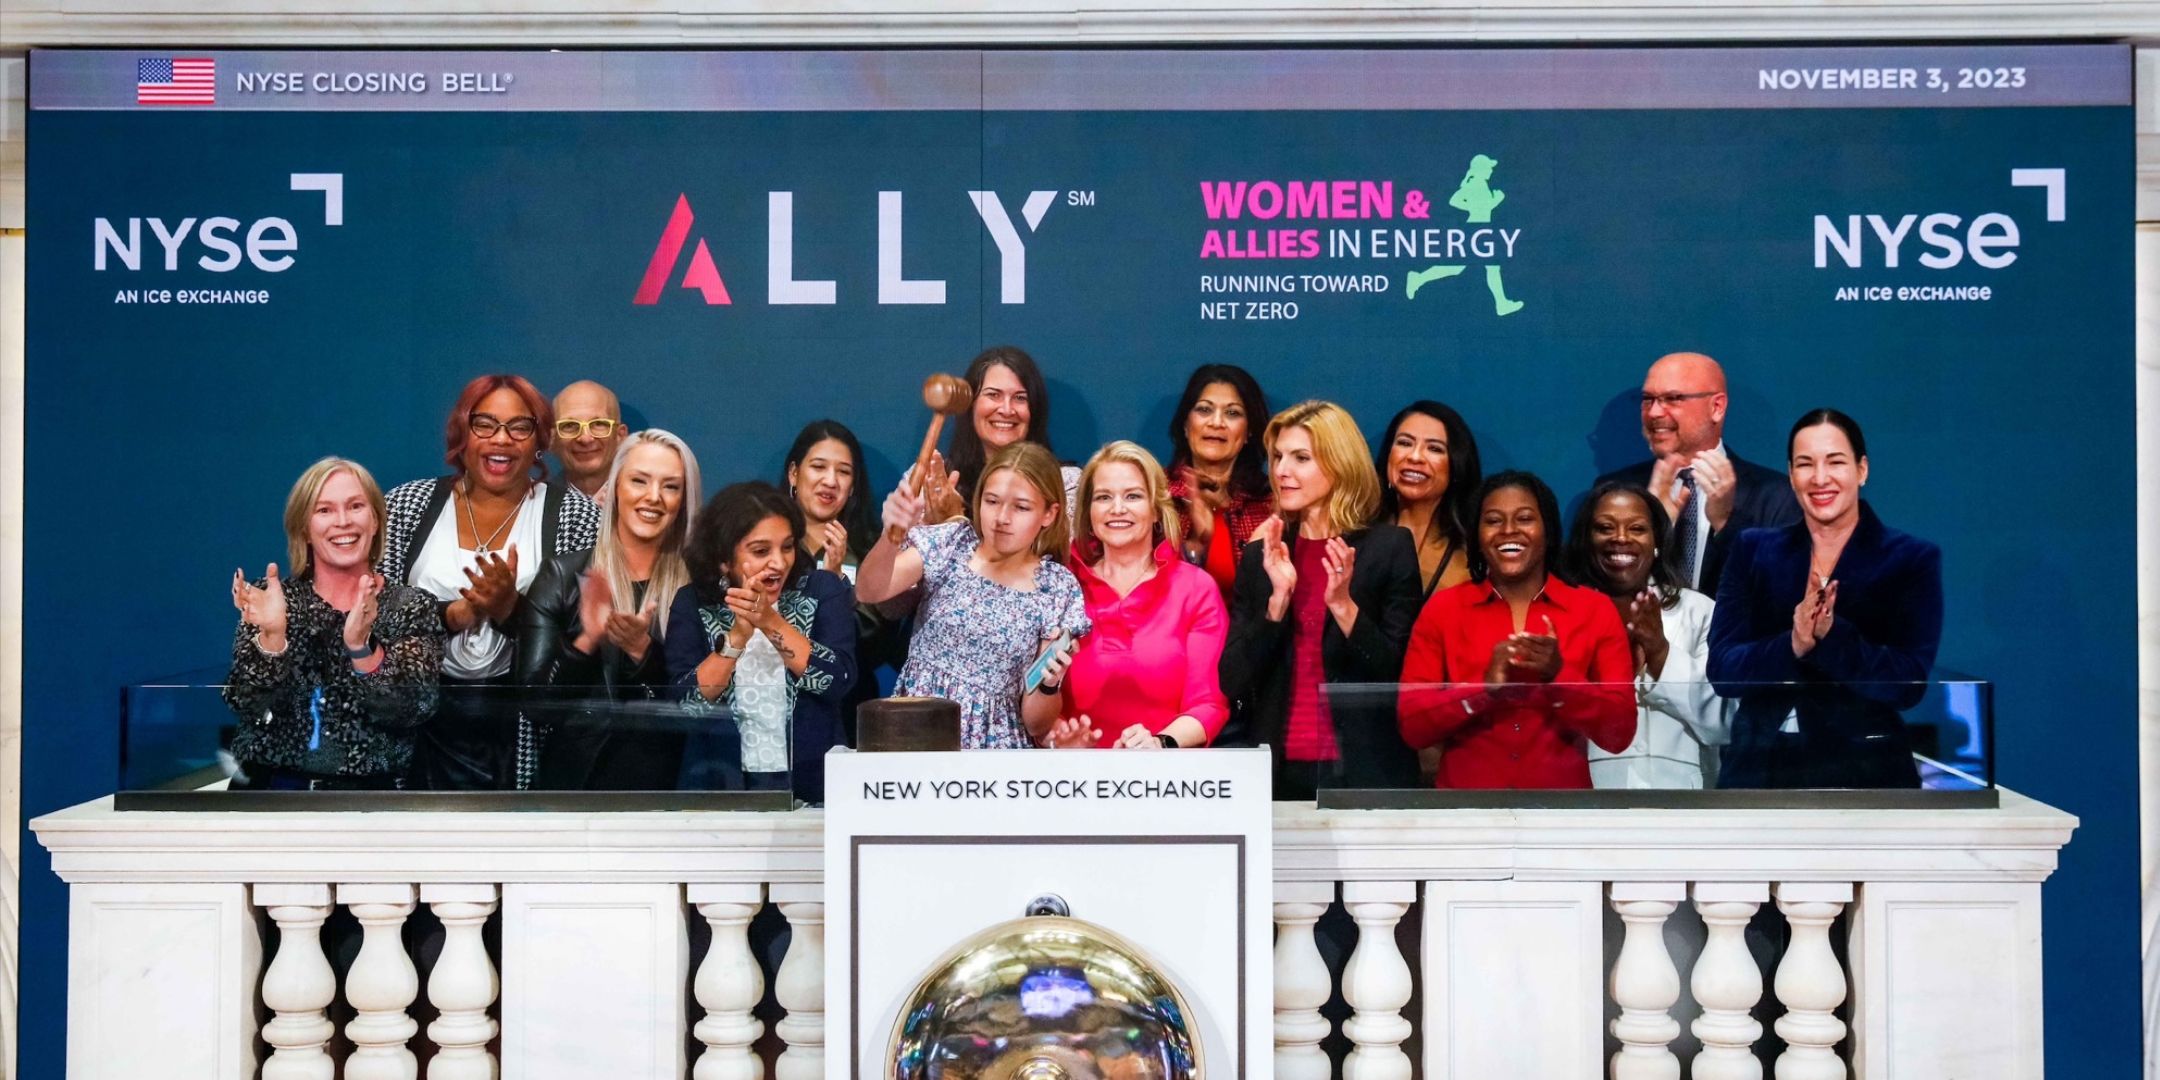 ALLY Energy rings the NYSE closing bell to mark momentum for NetZero